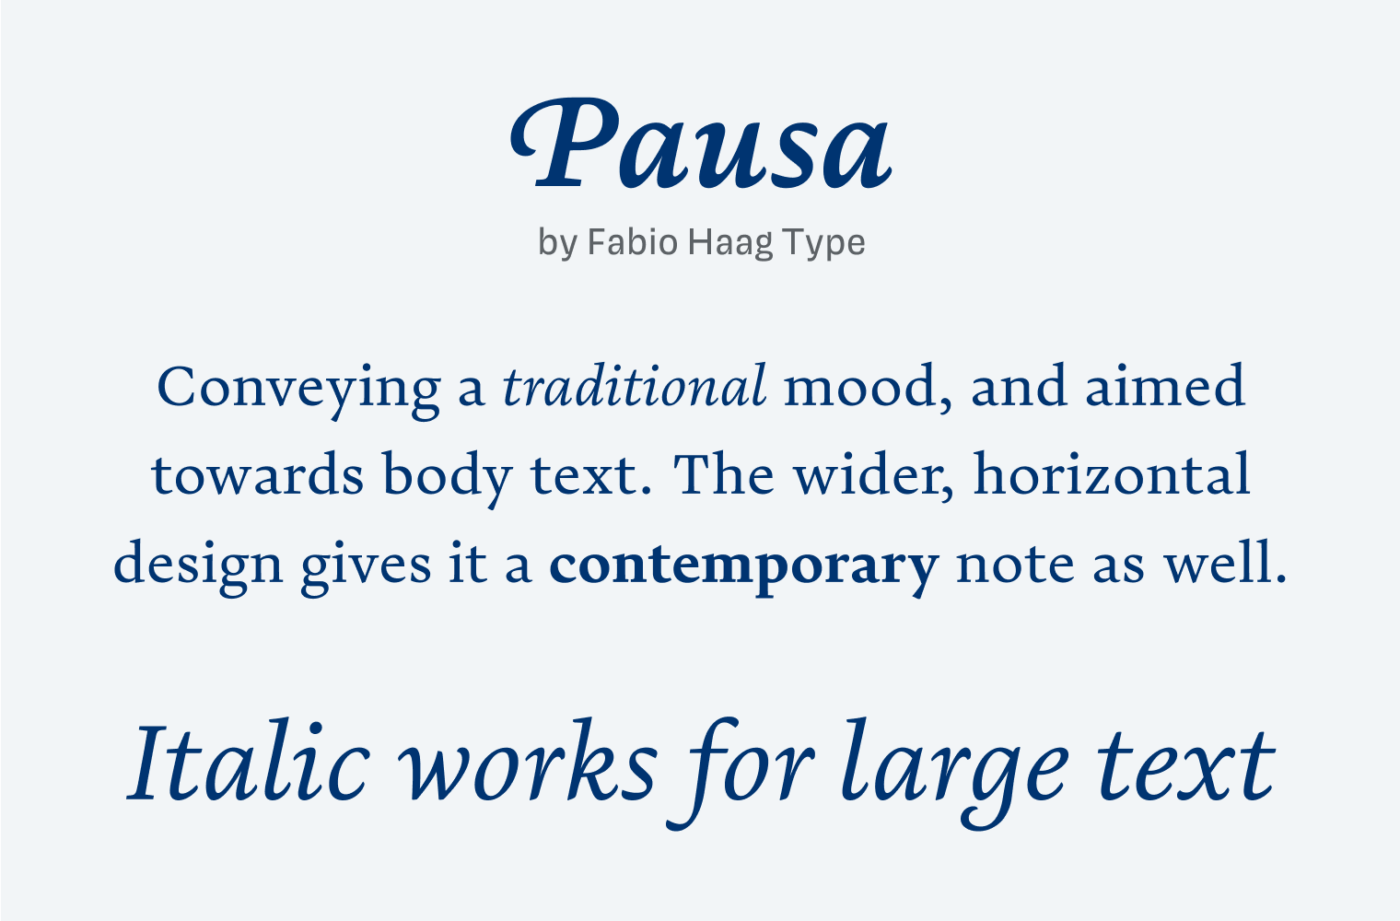 Pausa
by Fabio Haag Type
Conveying a traditional mood, and aimed towards body text. The wider, horizontal design gives it a contemporary note as well.
Italic works for large text